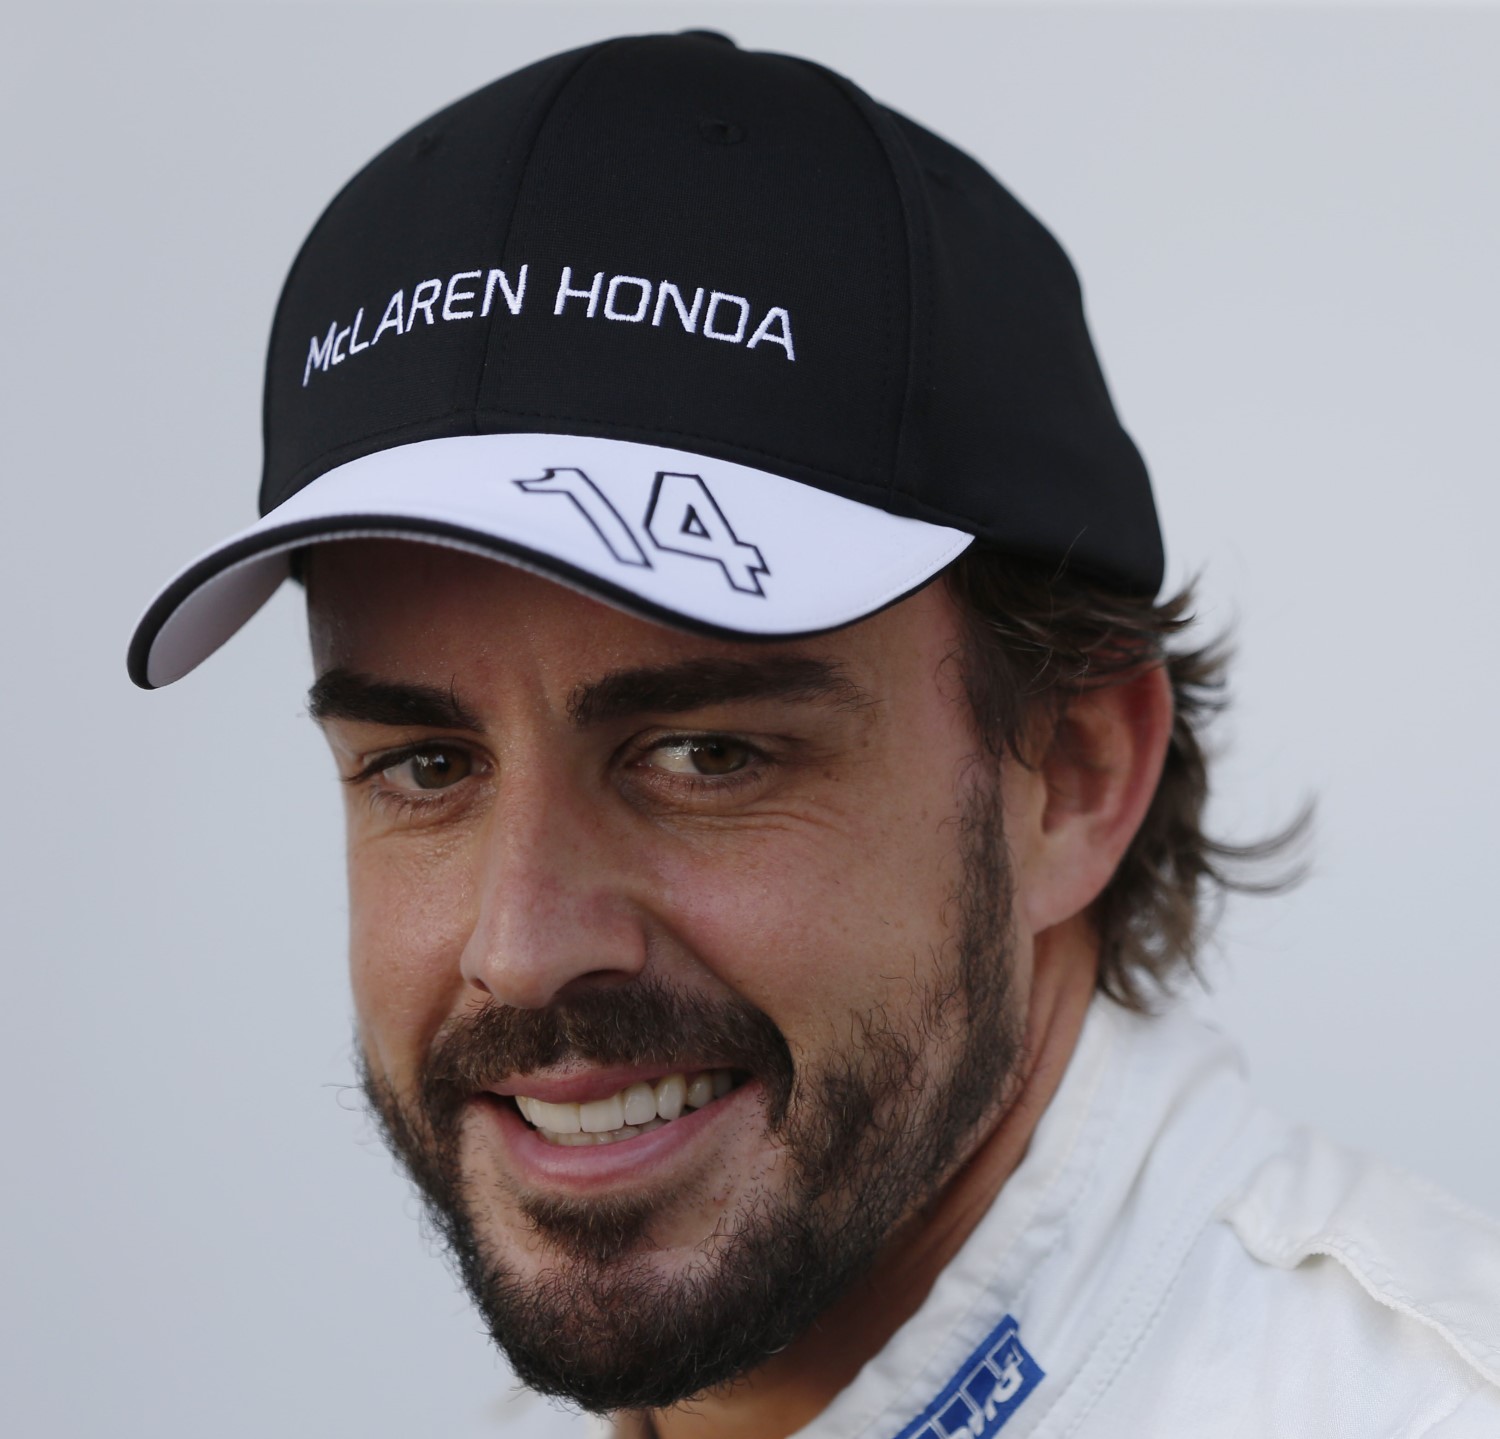 Alonso forgets that Mercedes will be at least 2 seconds faster in 2016, so how much will Honda really gain?